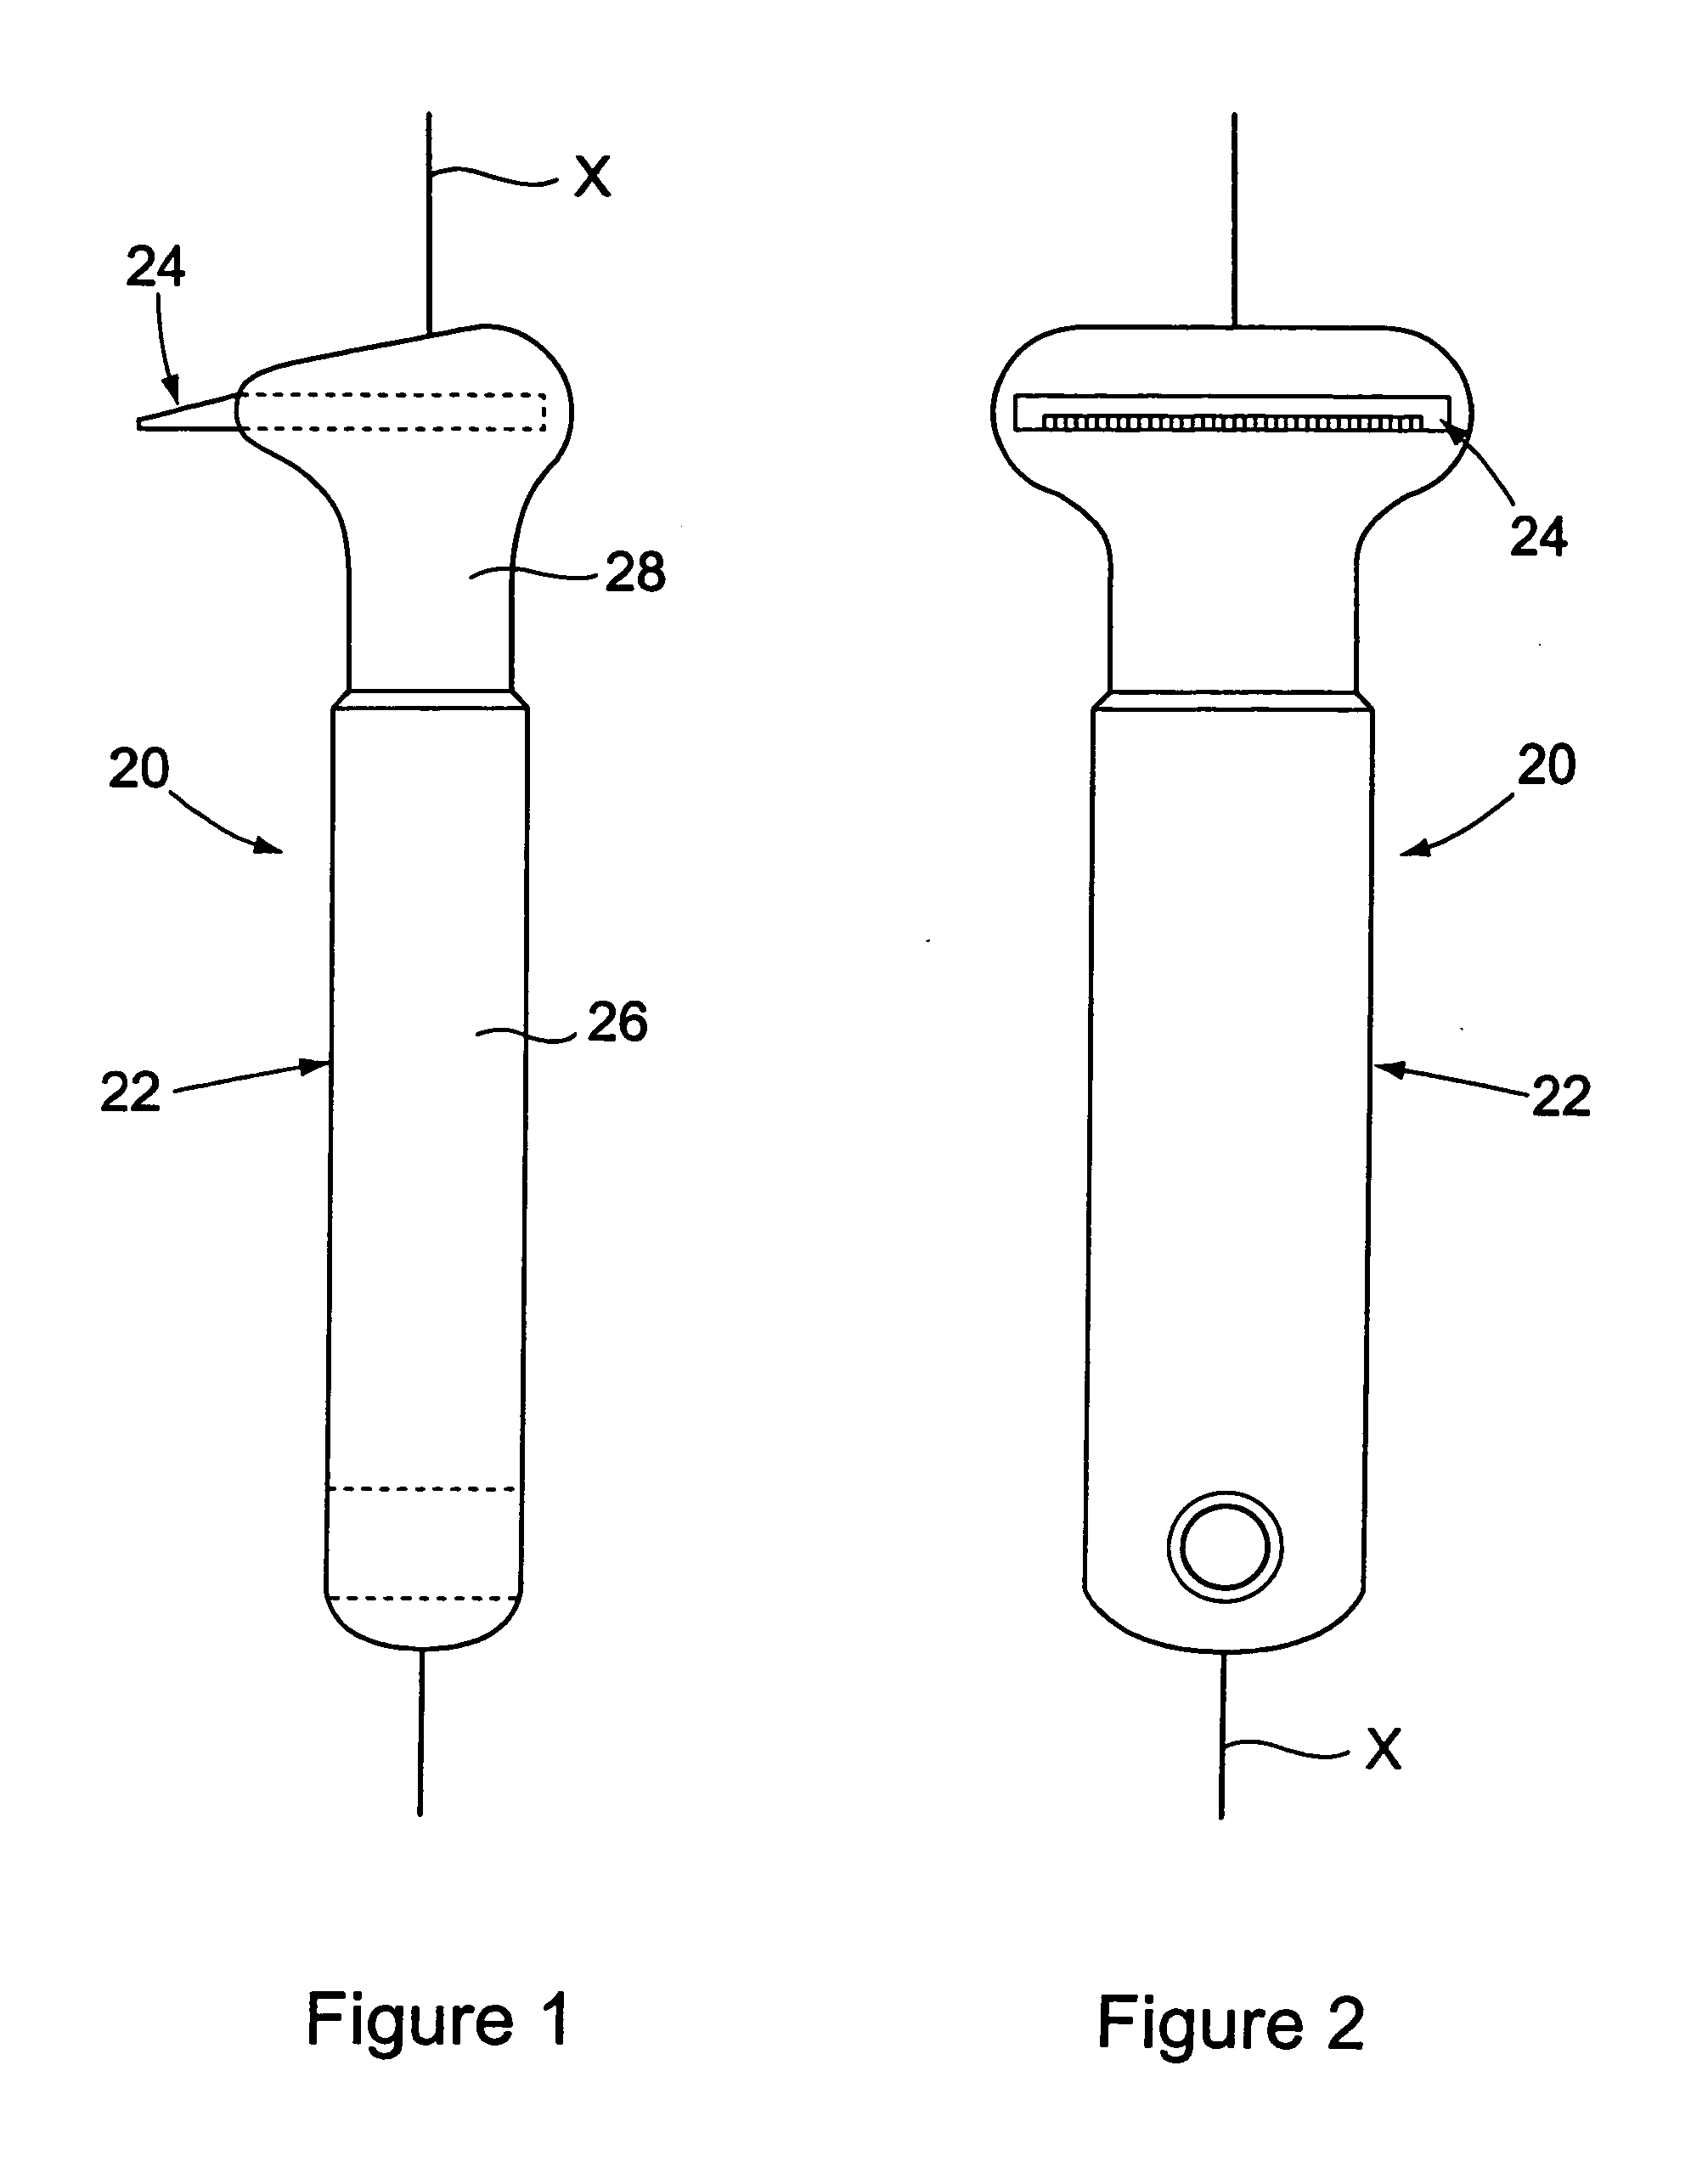 Pet grooming tool and method for removing loose hair from a furry pet